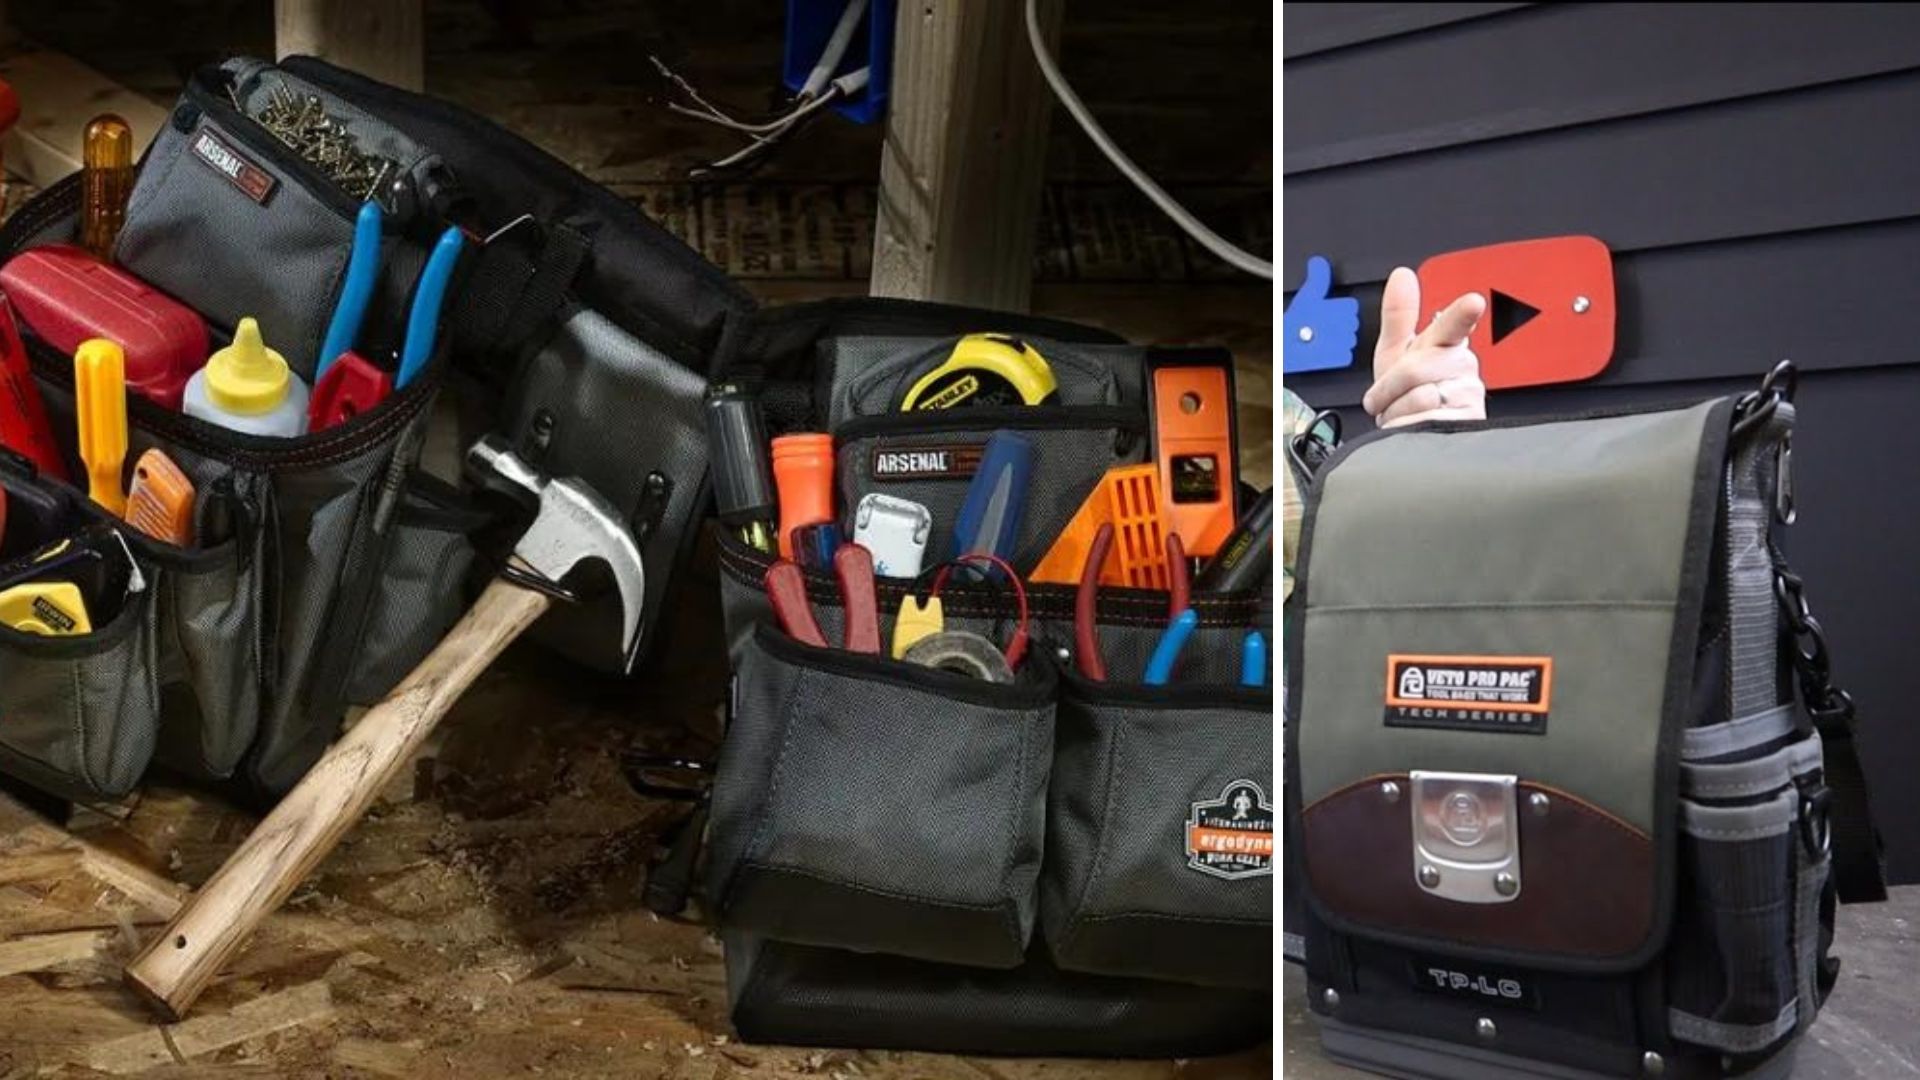  Images of Veto Tool Bags.